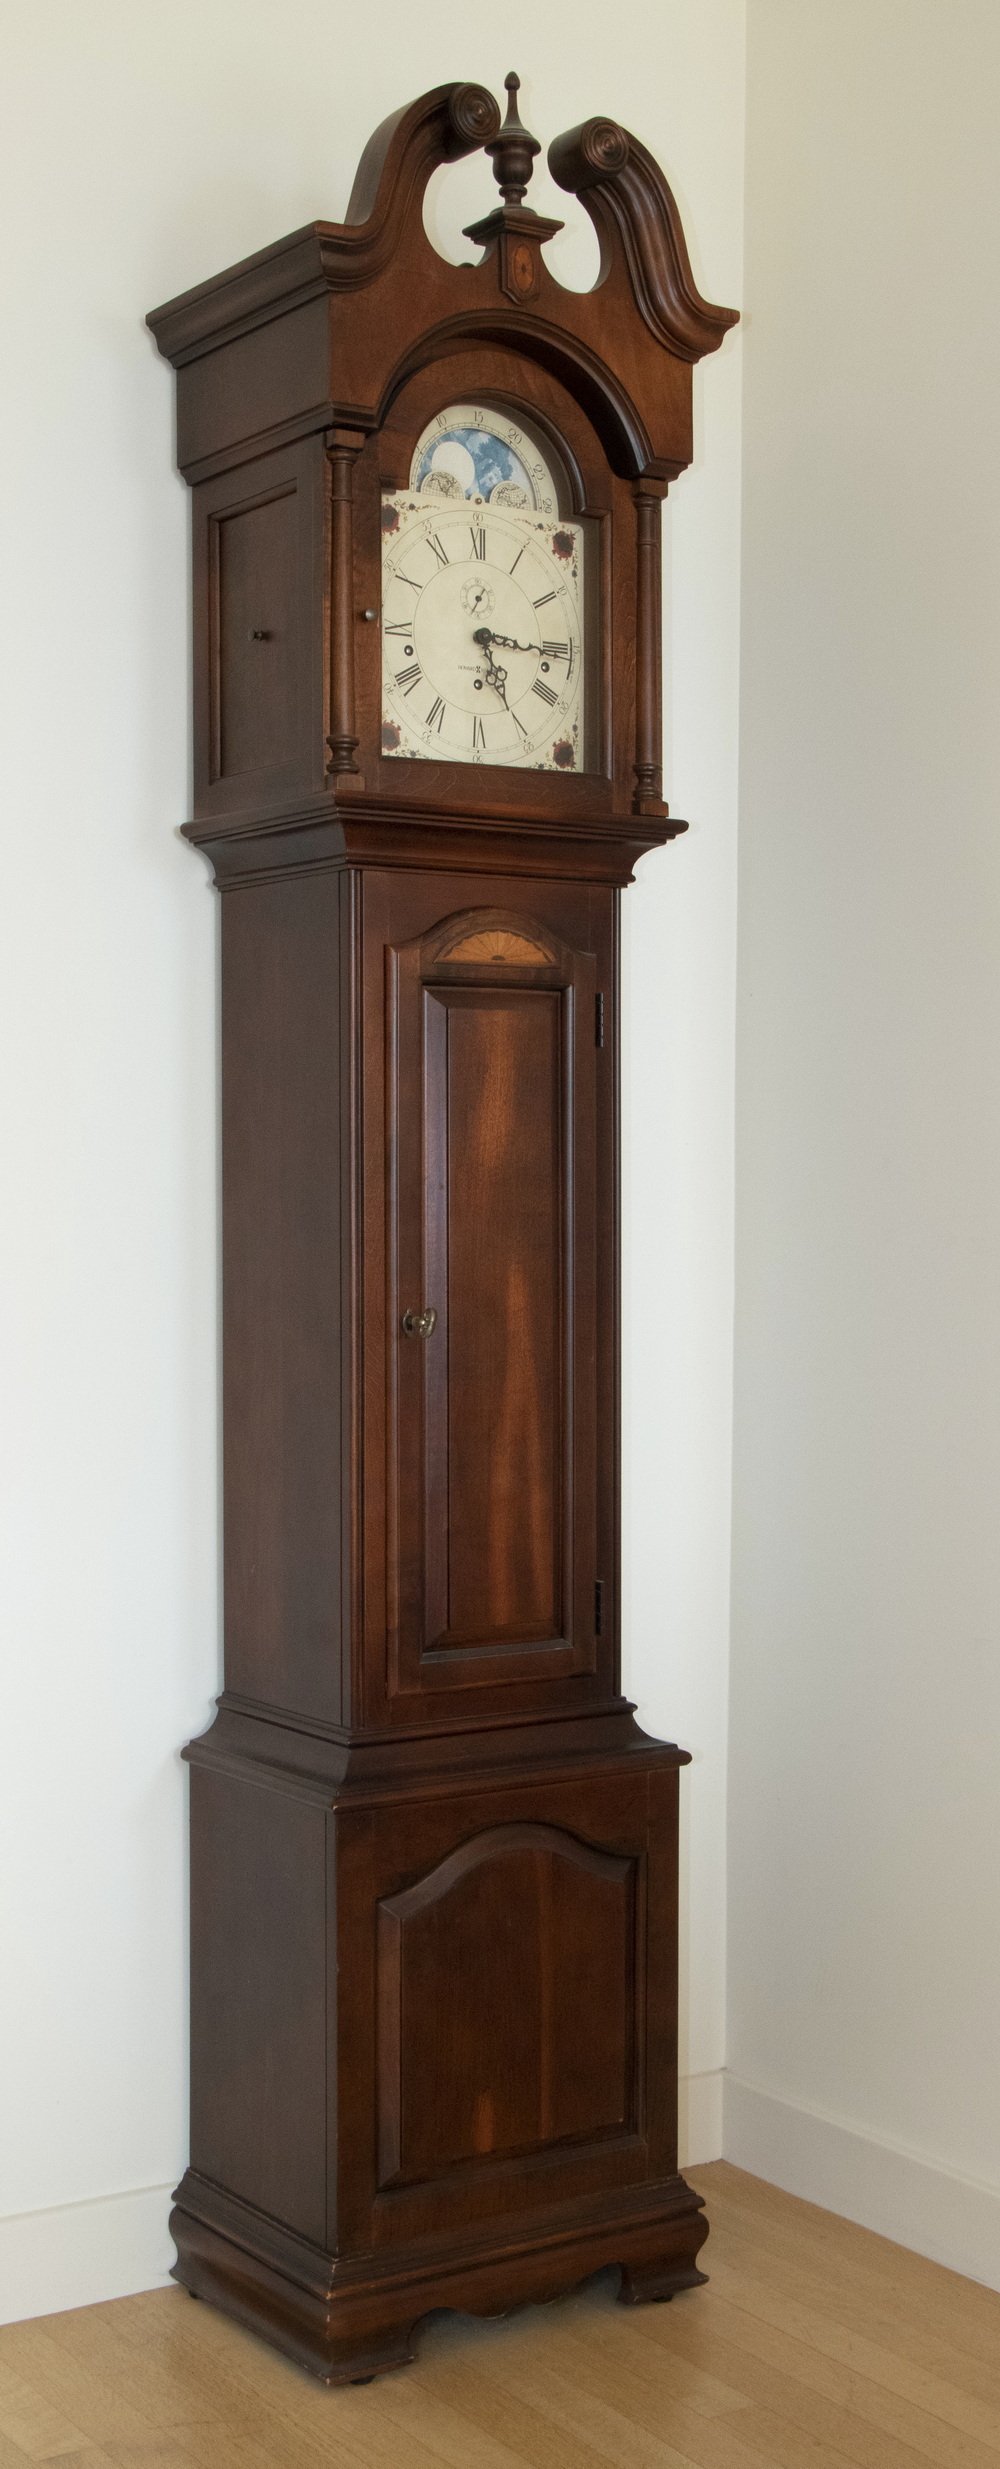 GRANDFATHER CLOCK BY HOWARD MILLER 2d6712